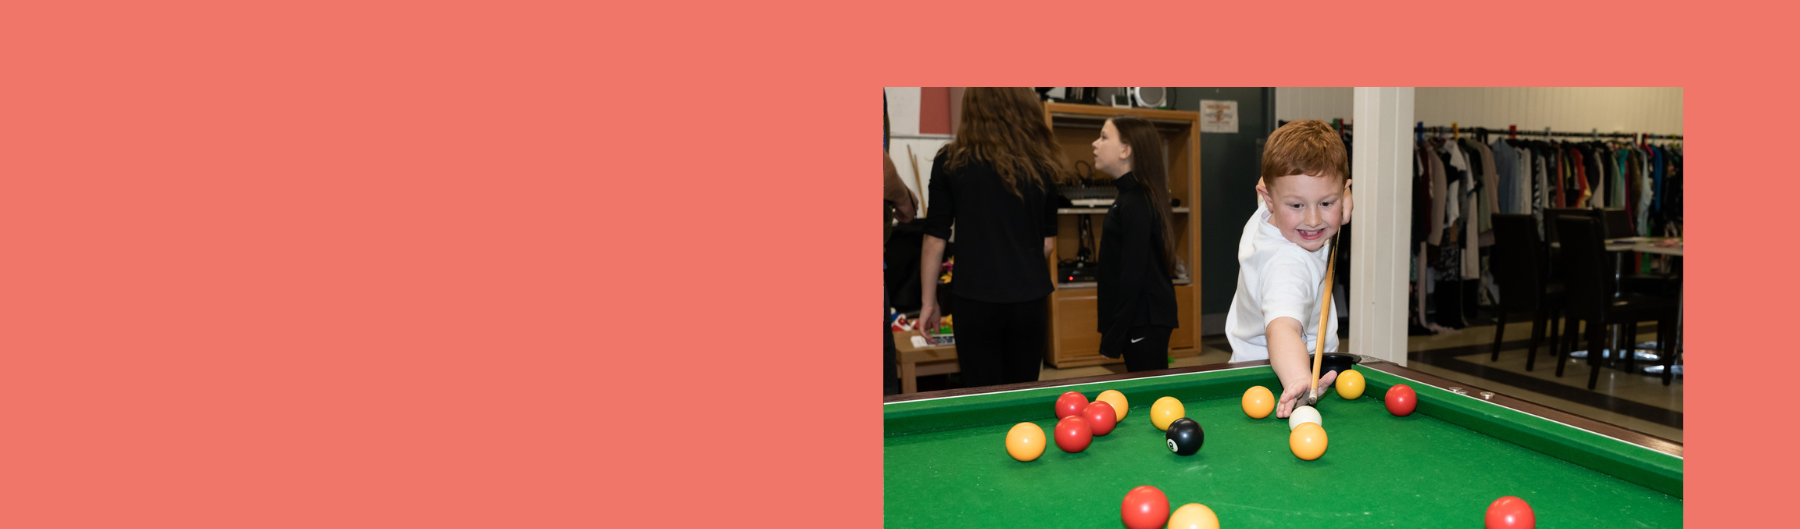 photo of a young boy playing snooker